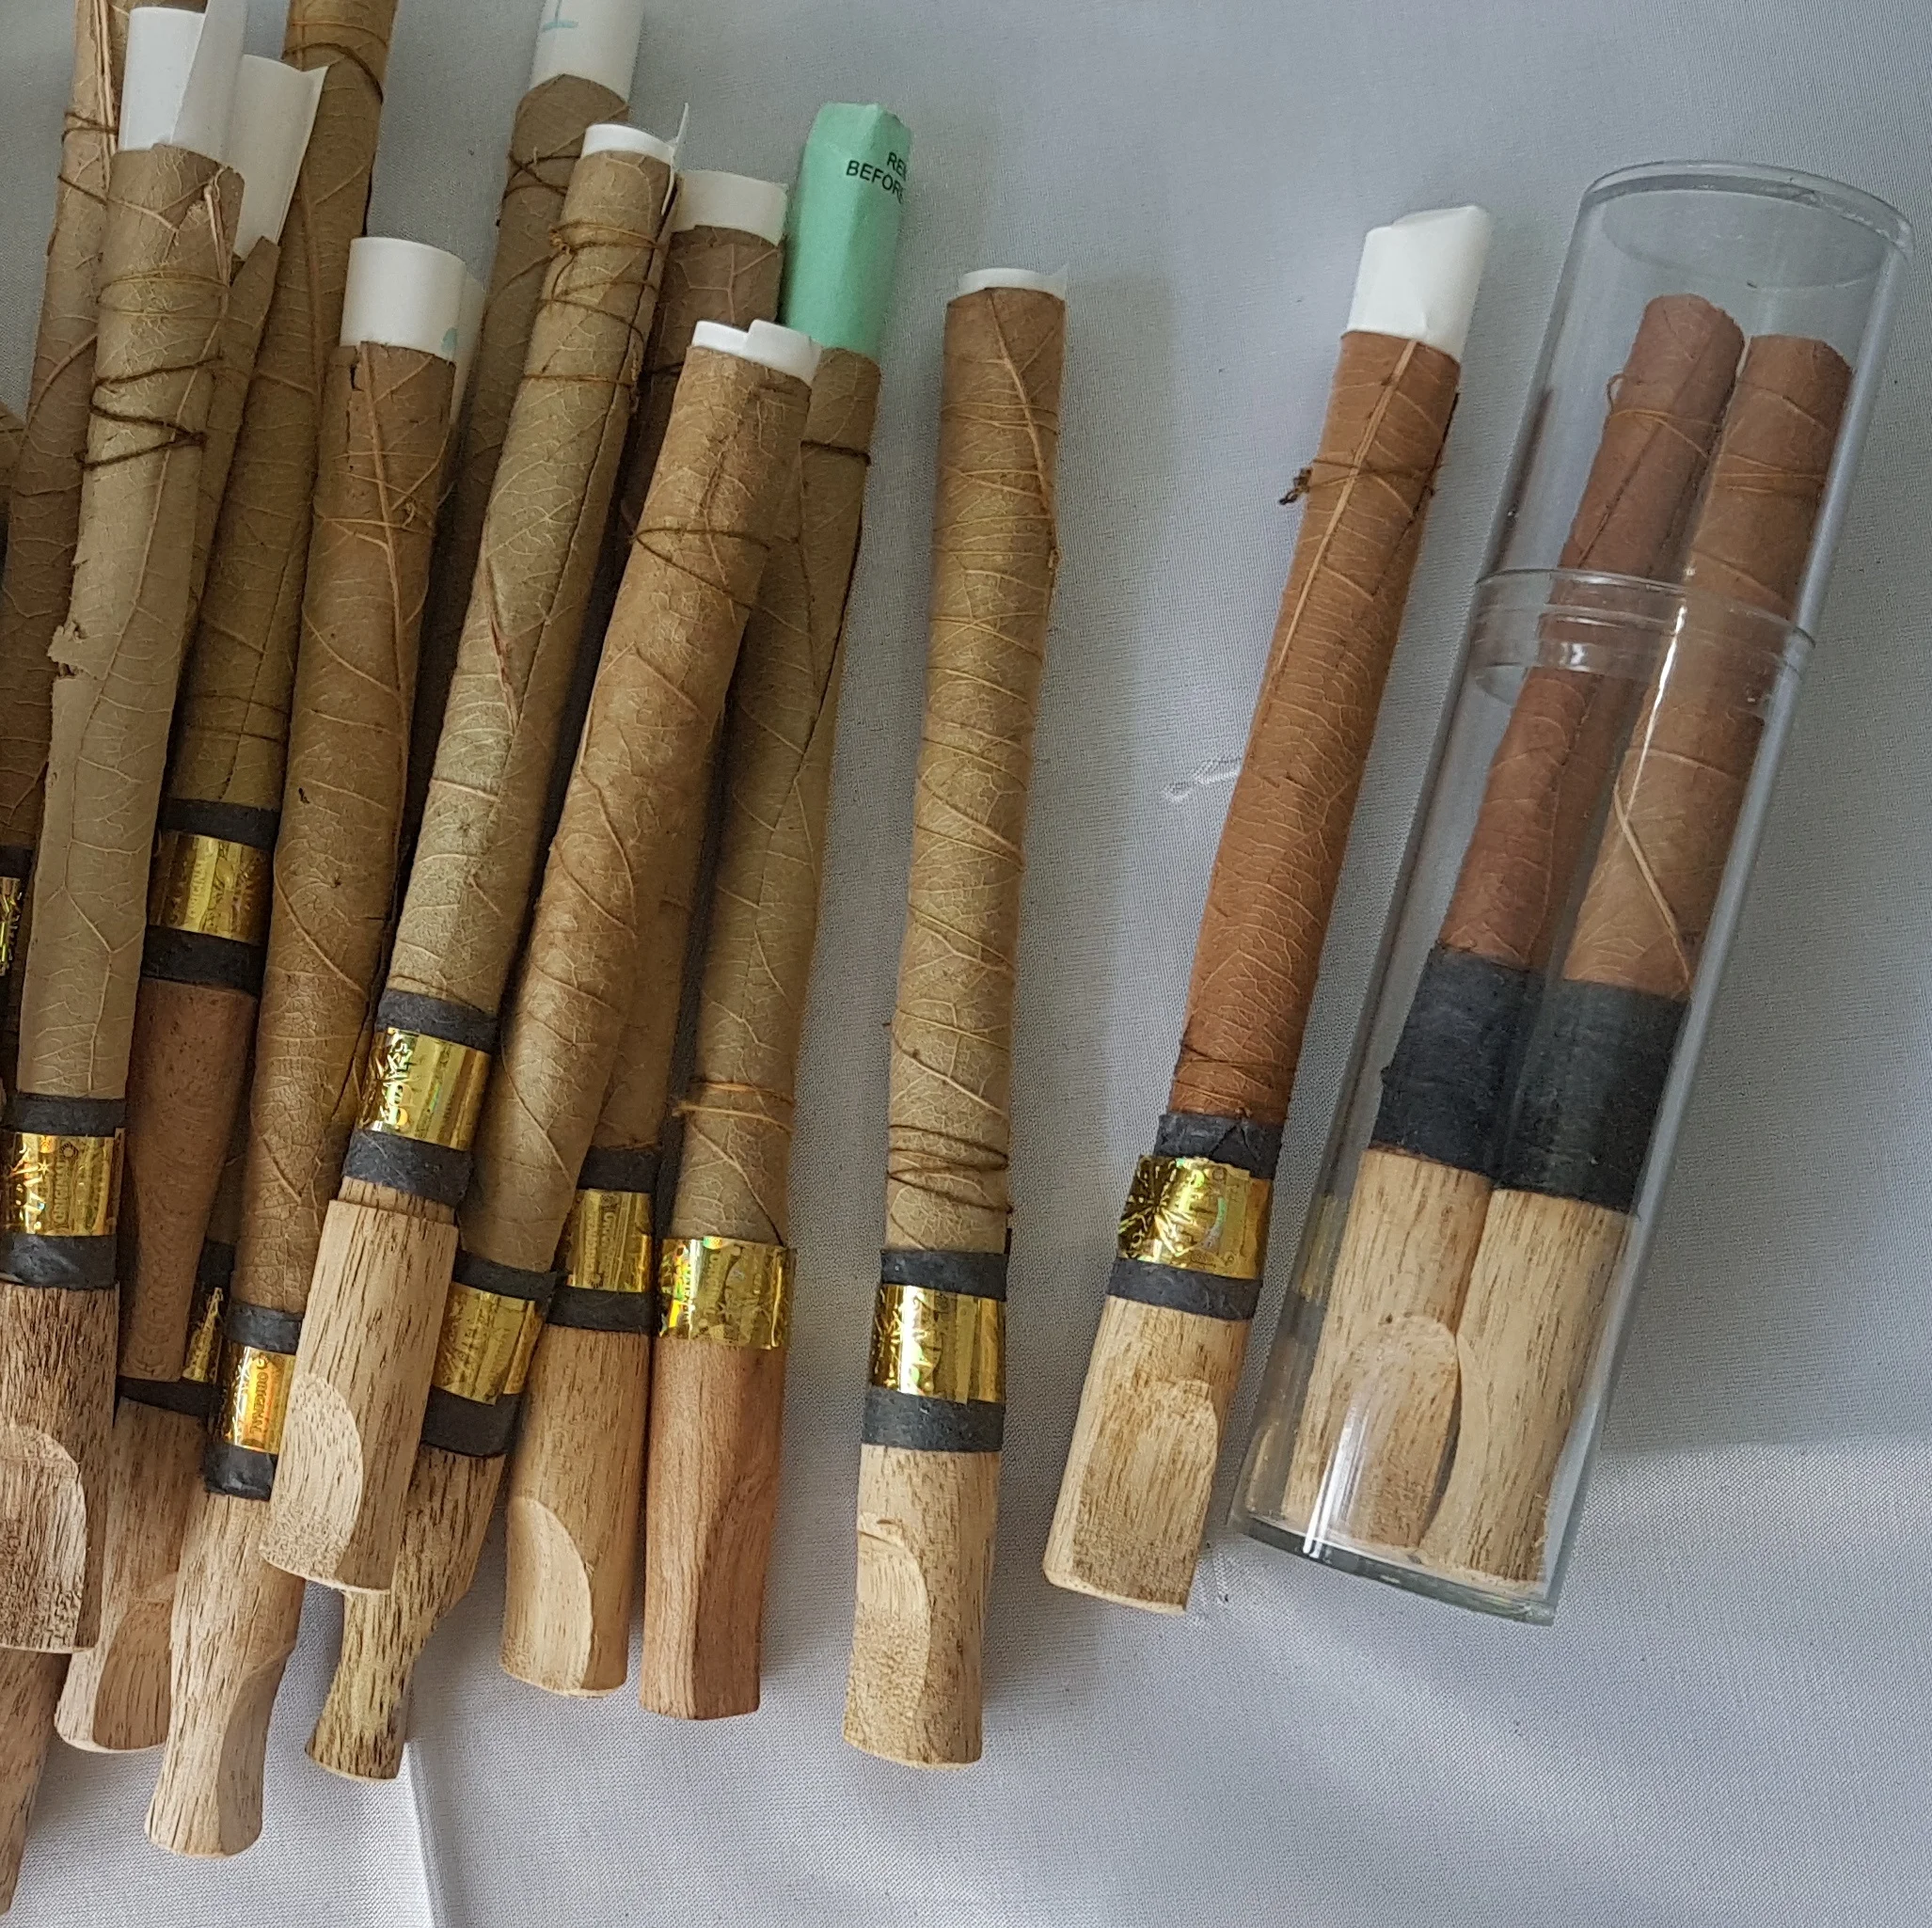 
Round End Wooden 11x38 mm Cigar Tips for Pre Roll Smoking leaf Pre Rolls and blunts, wooden tips blunts looking for distributors 